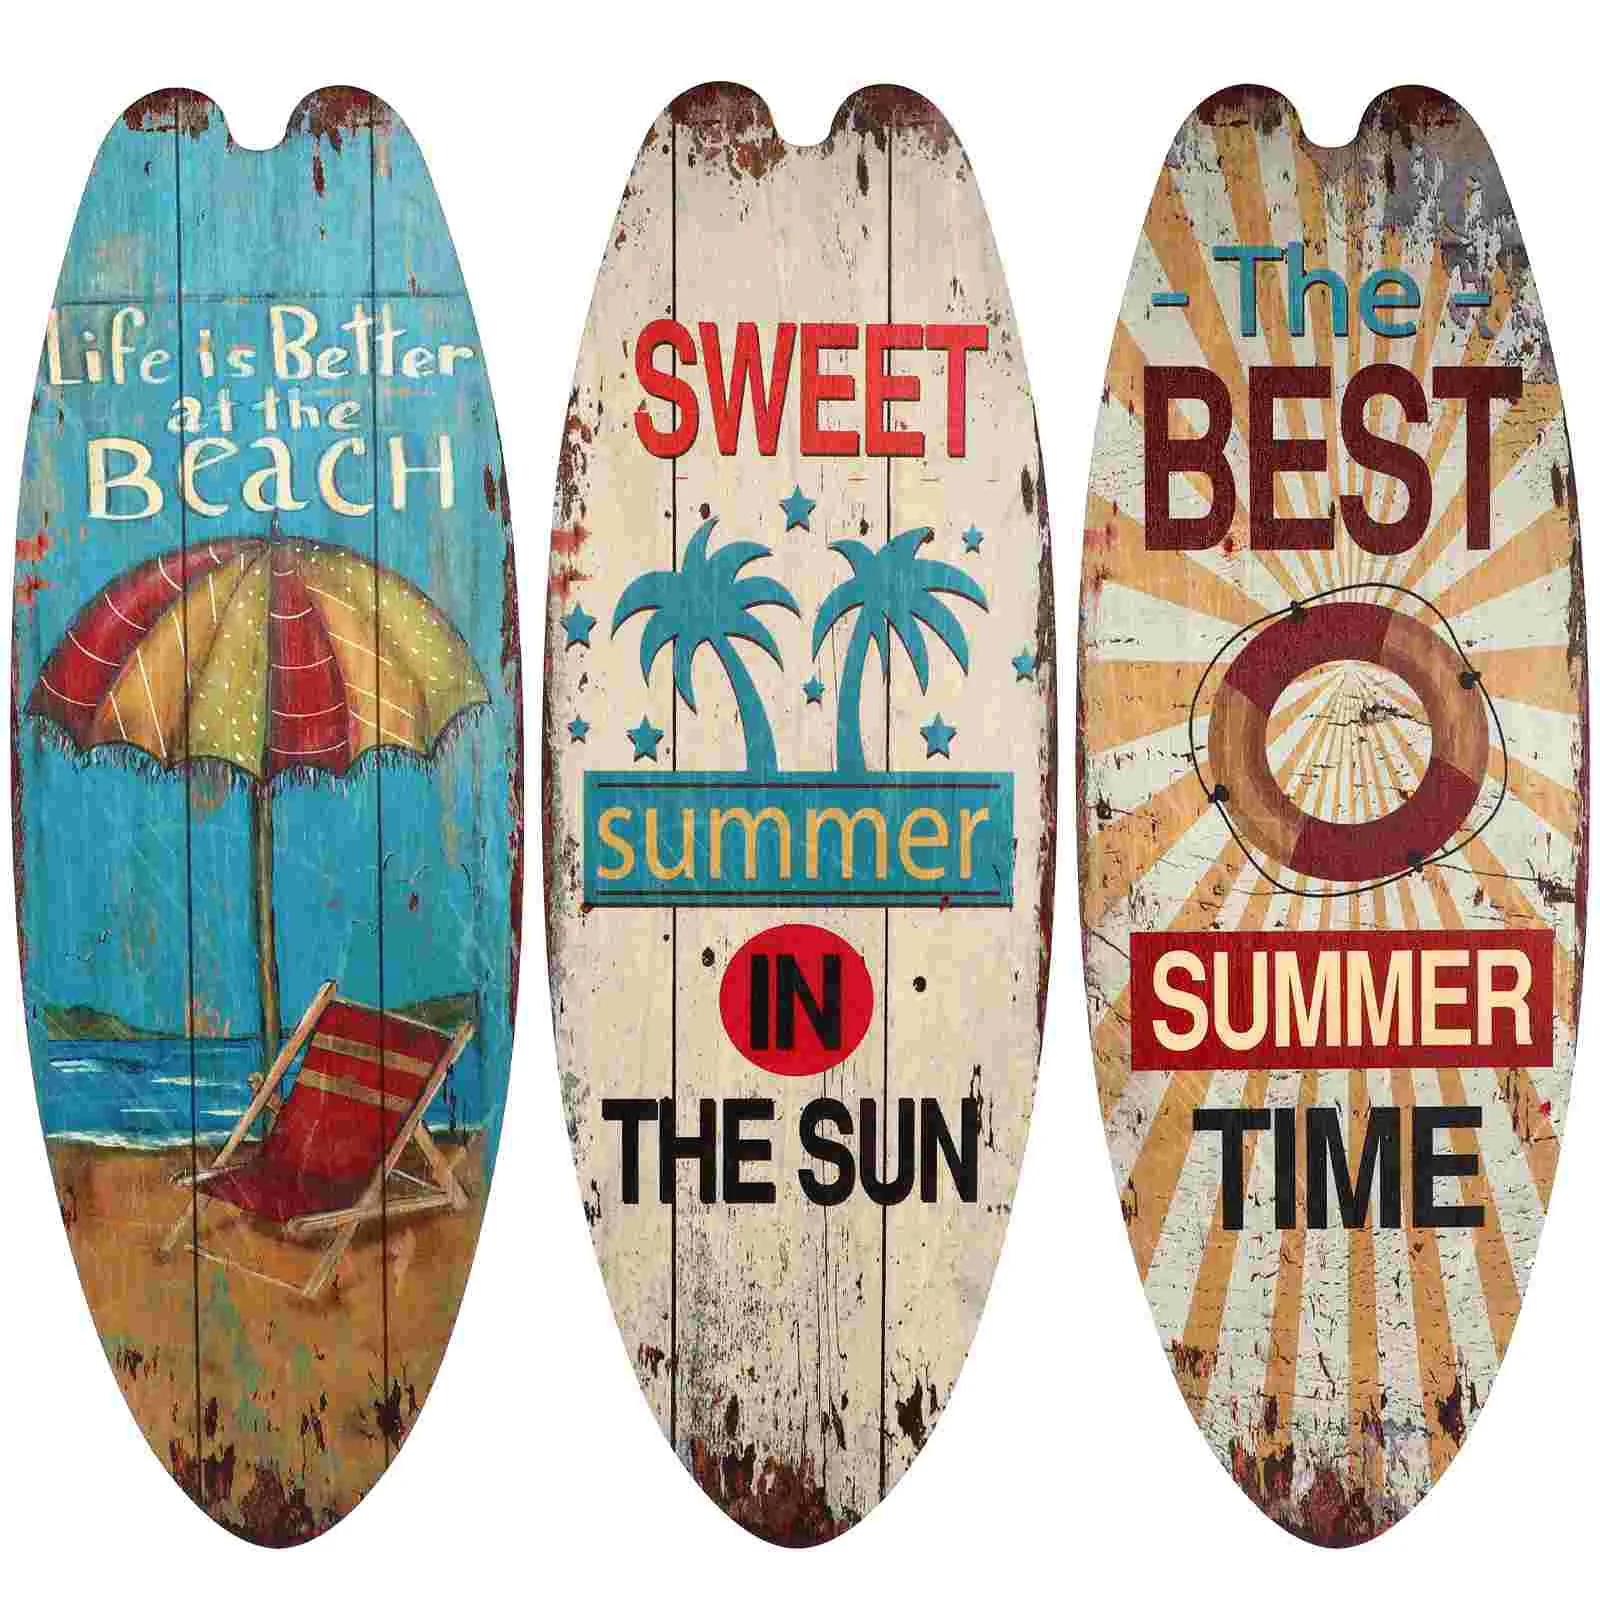 

3 Pcs Surfboard Wooden Sign Vintage Ornaments Wall Decor Plaque Decorate Pool Decoration Outdoor Indoor Seaside Coffee Shop